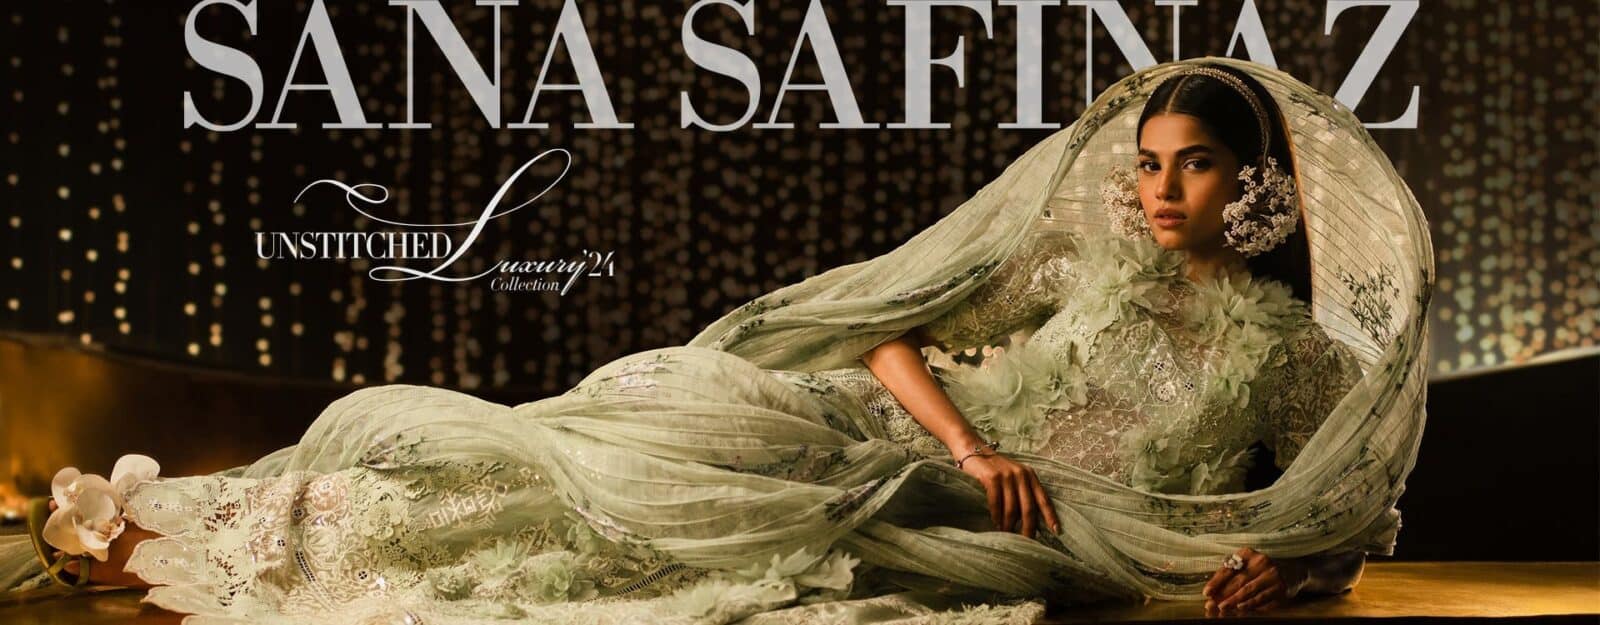 SERENE S 137 F PAKISTANI SUITS ONLINE SHOPPING